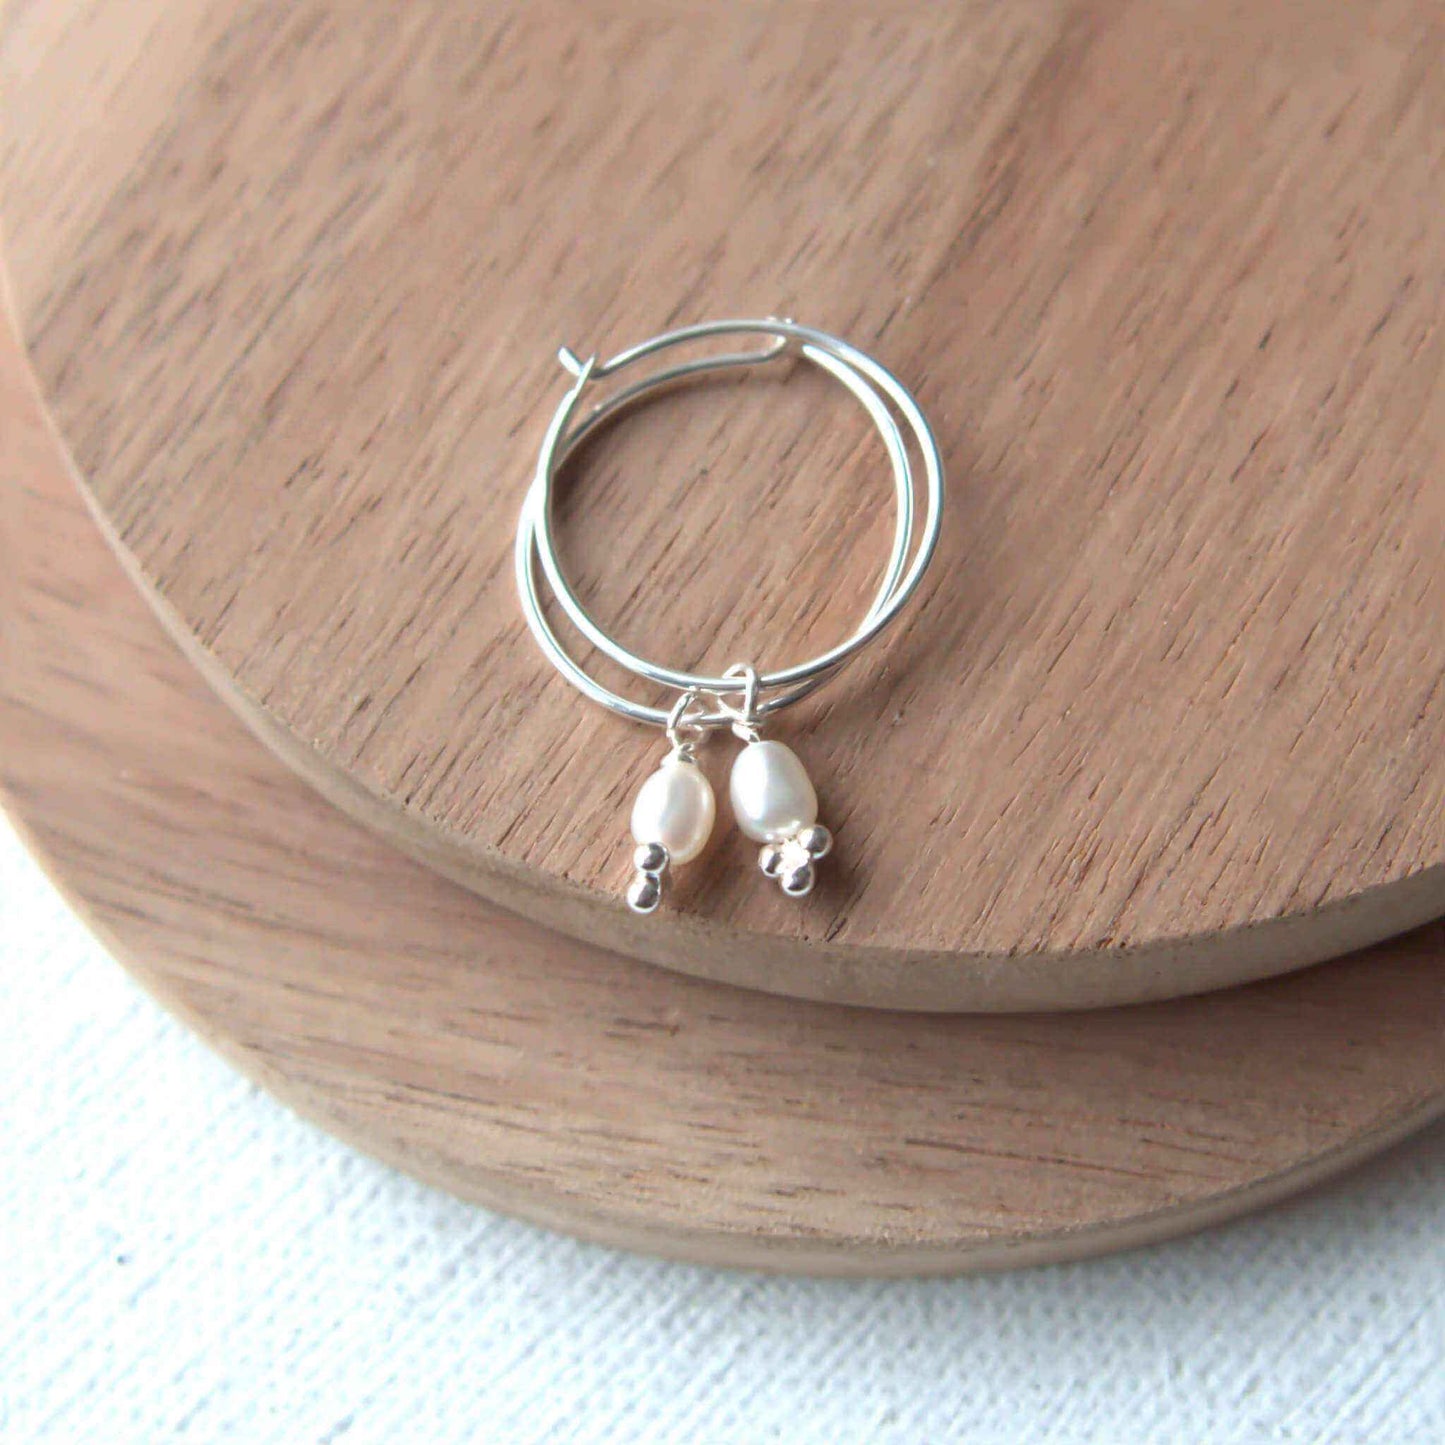 Modern Pearl and Sterling silver hoop earrings with thin silver hoops and a small cream freshwater pearl dangle. Handmade by maram jewellery in Edinburgh.